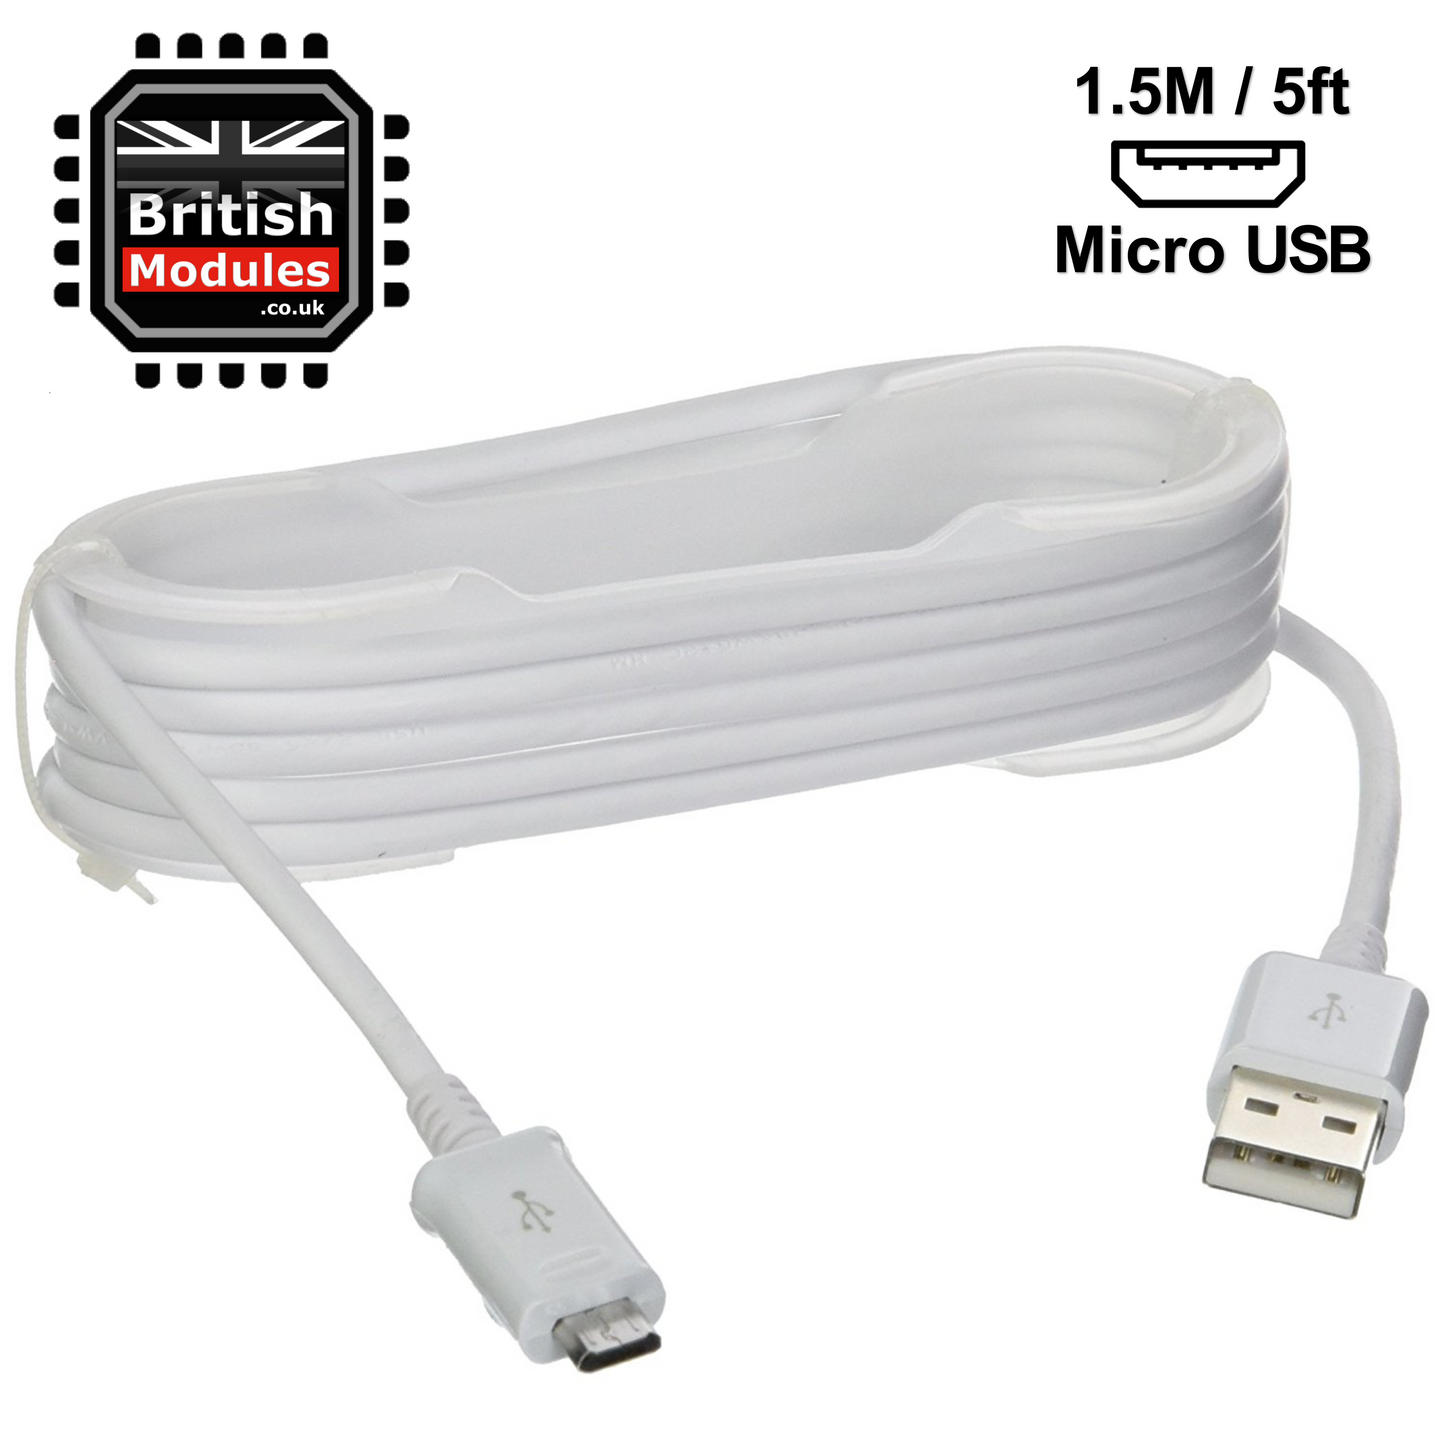 1.5M Micro USB Cable Data Sync Phone Charger Fast Charge for Android, Samsung Galaxy, Nexus, LG, Sony, PS4, HTC, Motorola, Kindle, Nokia and More